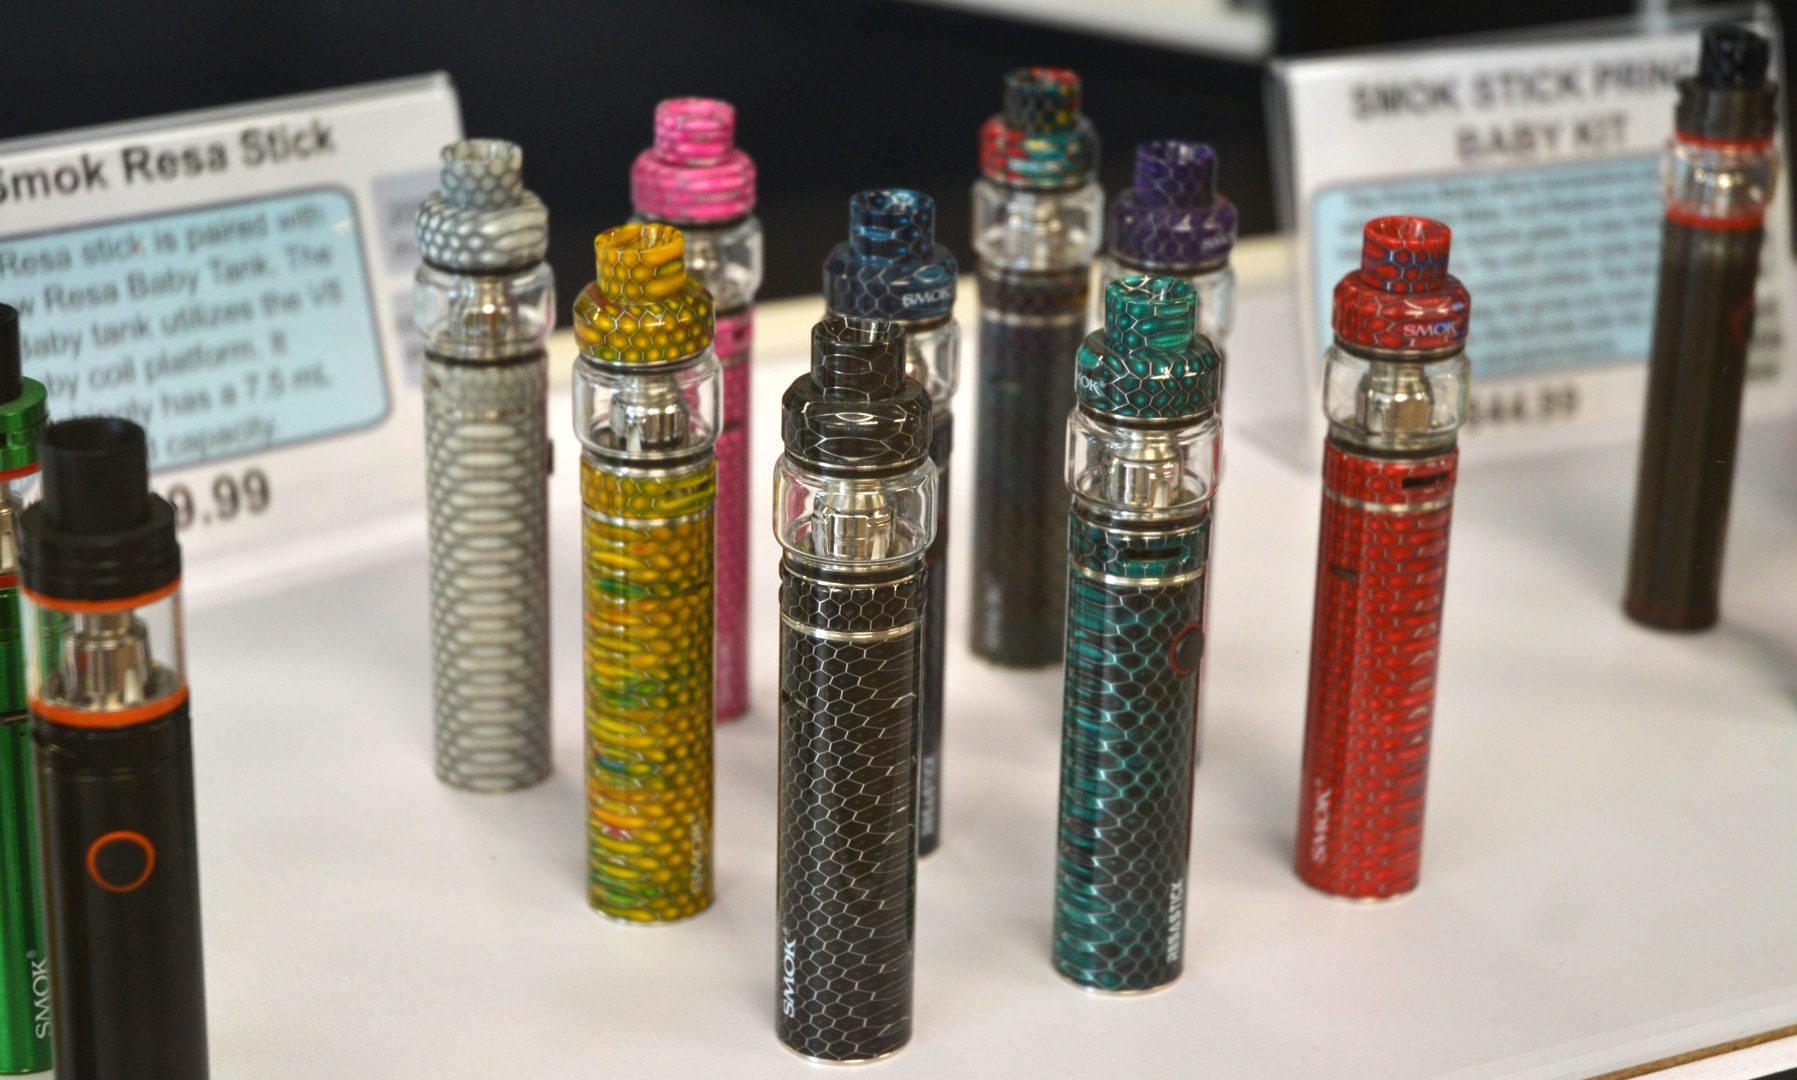 Vaping devices are on display at East Coast Vapor in Paxtang Borough, Dauphin County Jan. 6, 2020.